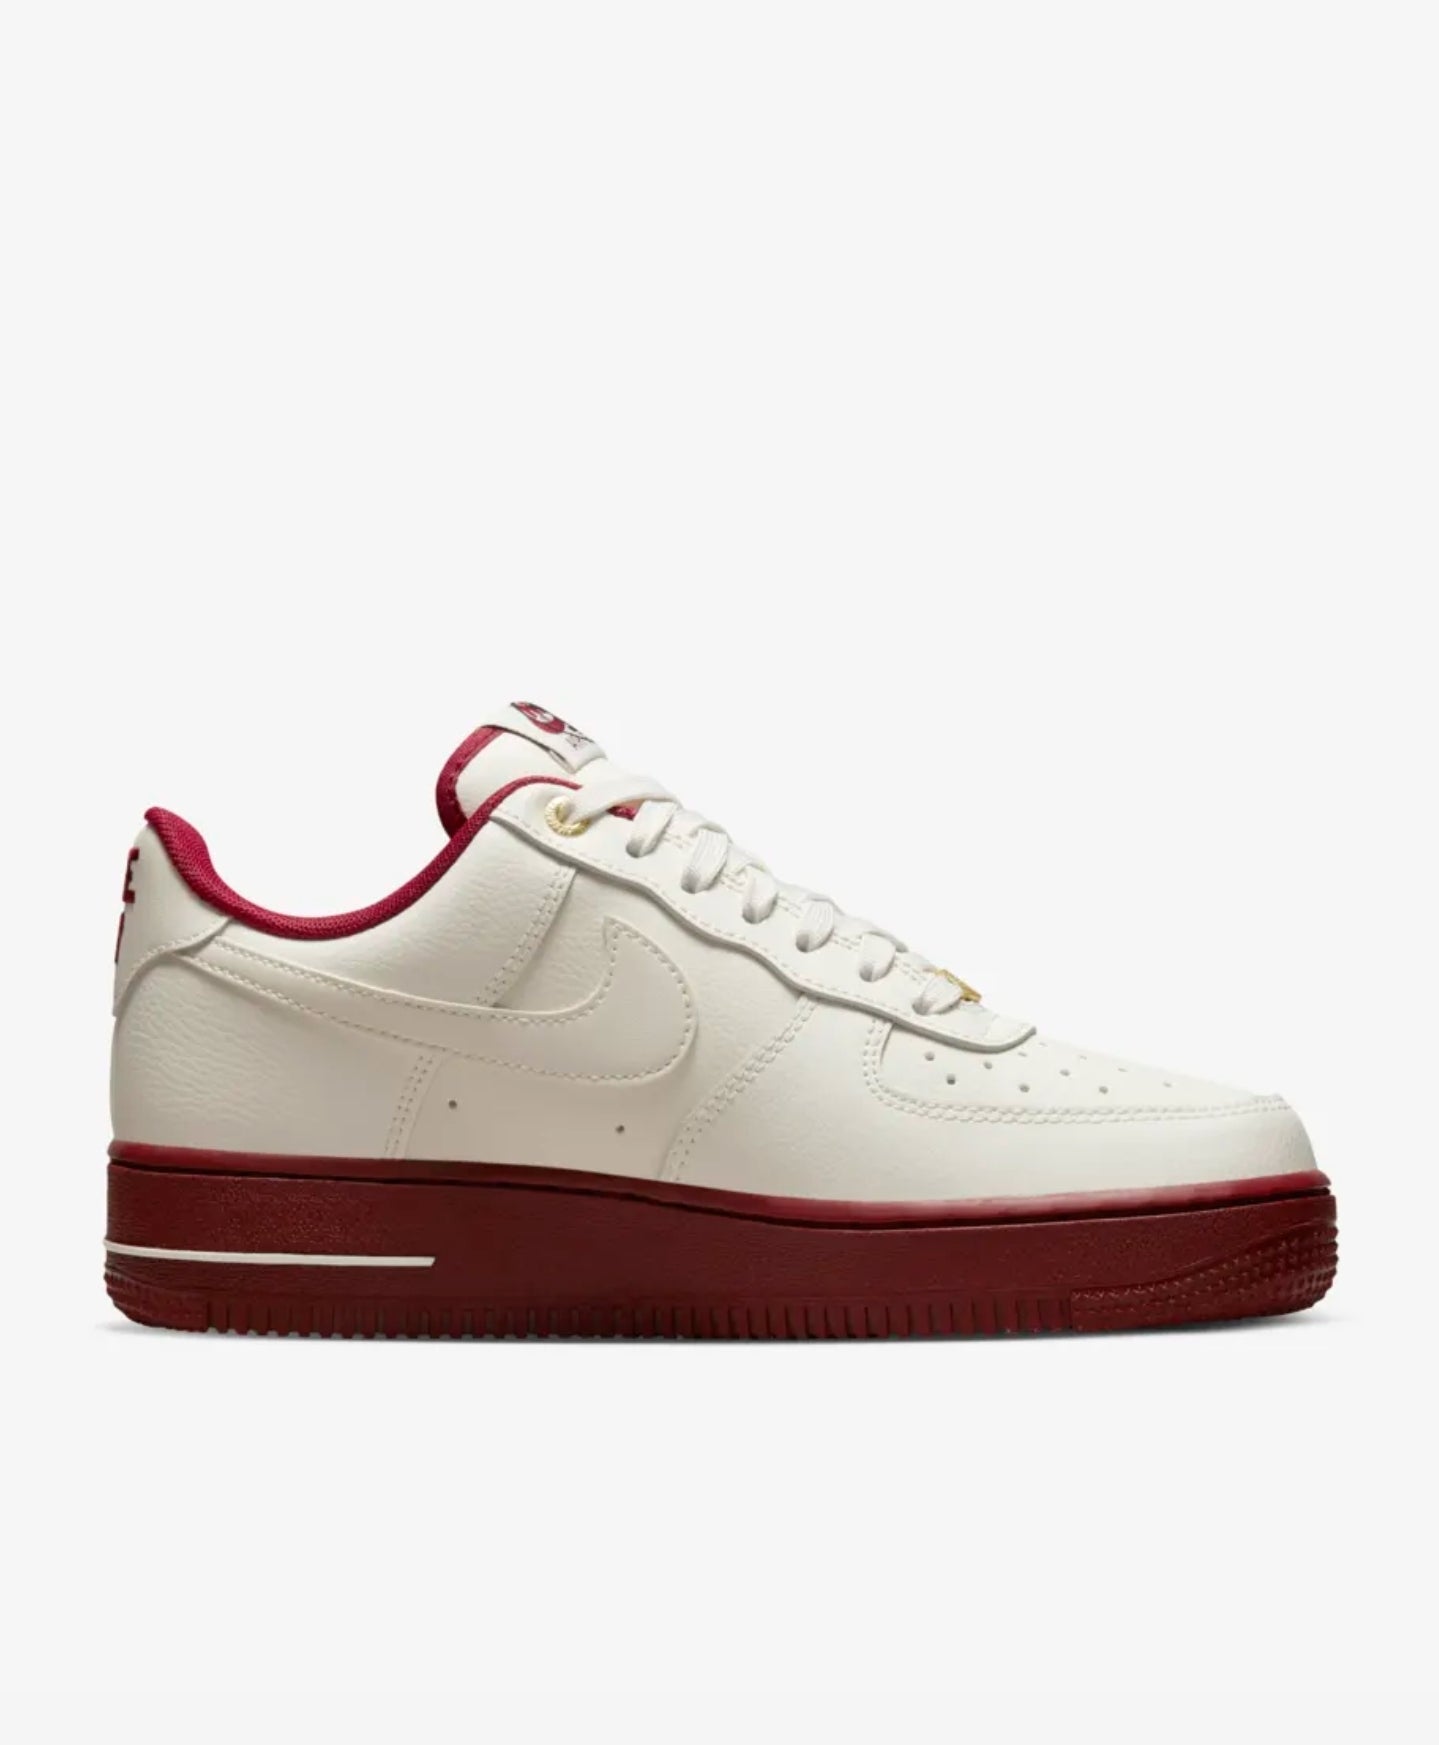 Air Force 1 '07 40th

"Join Forces"